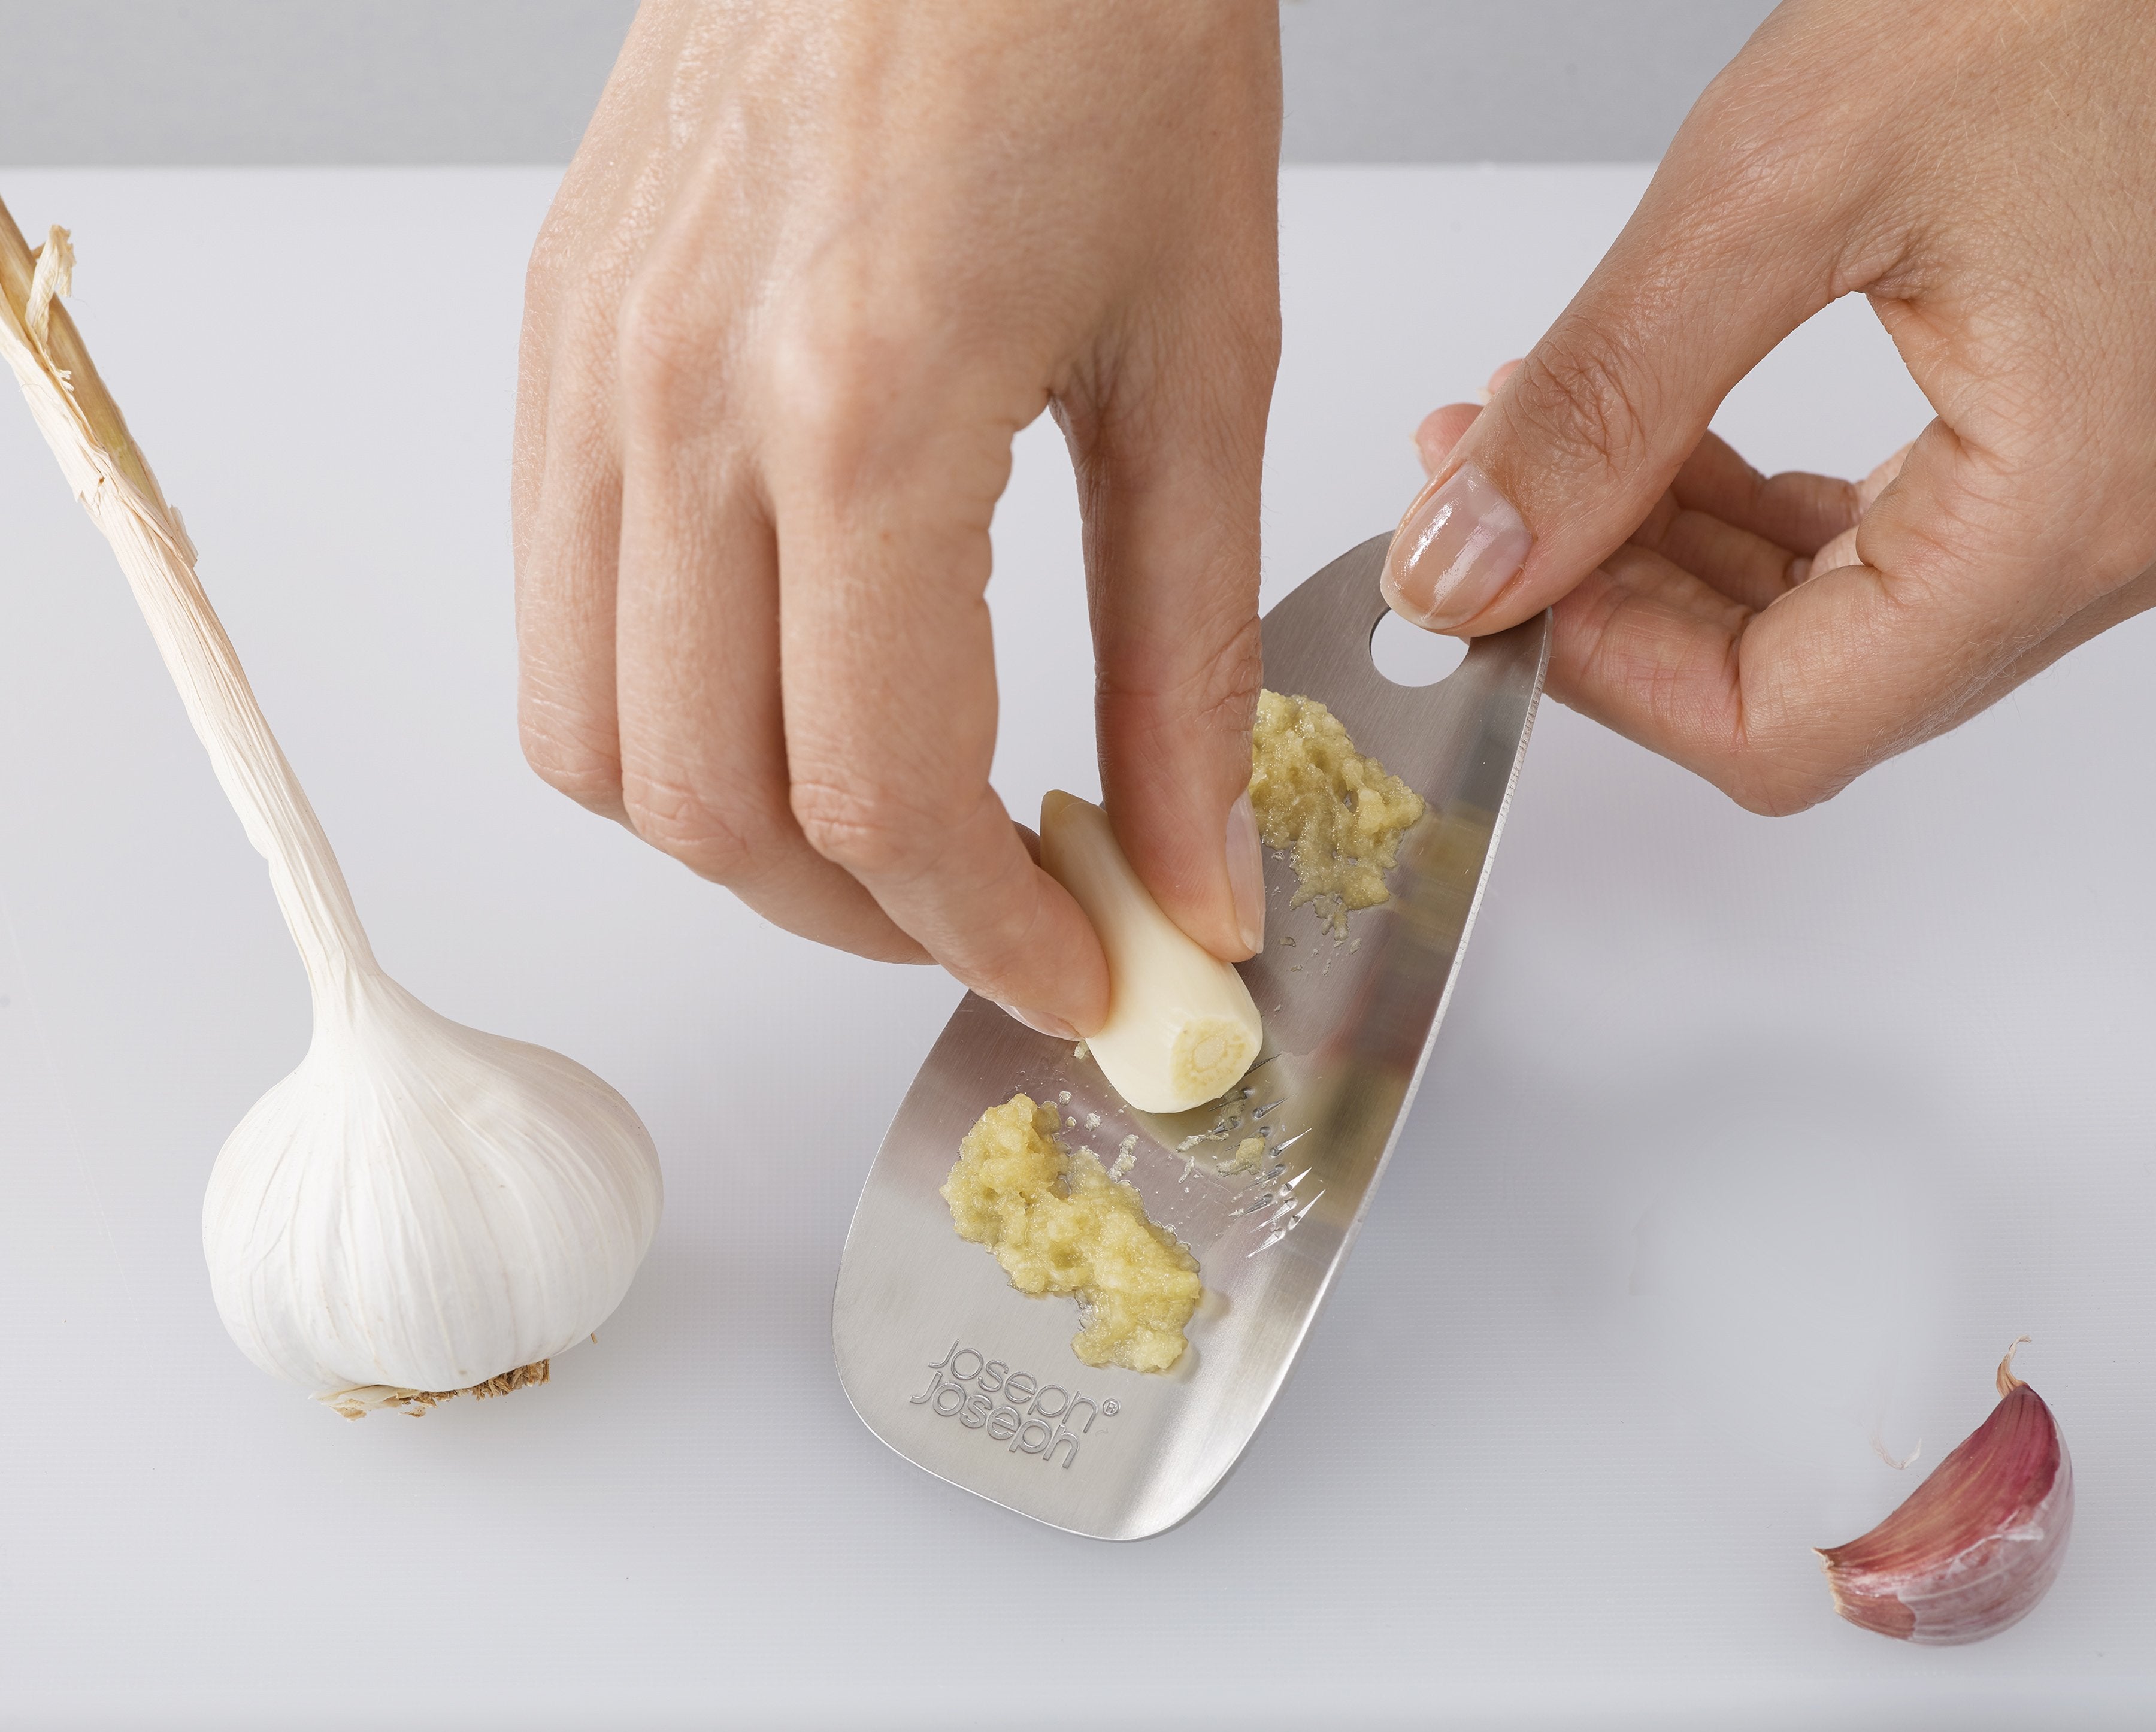 BEON.COM.AU  Make homemade garlic or ginger paste quickly and easily with this neat kitchen tool.  Sharp, double-action cutting teeth for fast results Smooth surface makes removing pulp easy Also ideal for grating nutmeg and other spices Stainless-steel helps remove garlic odour from fingers when washed by h... Joseph Joseph at BEON.COM.AU